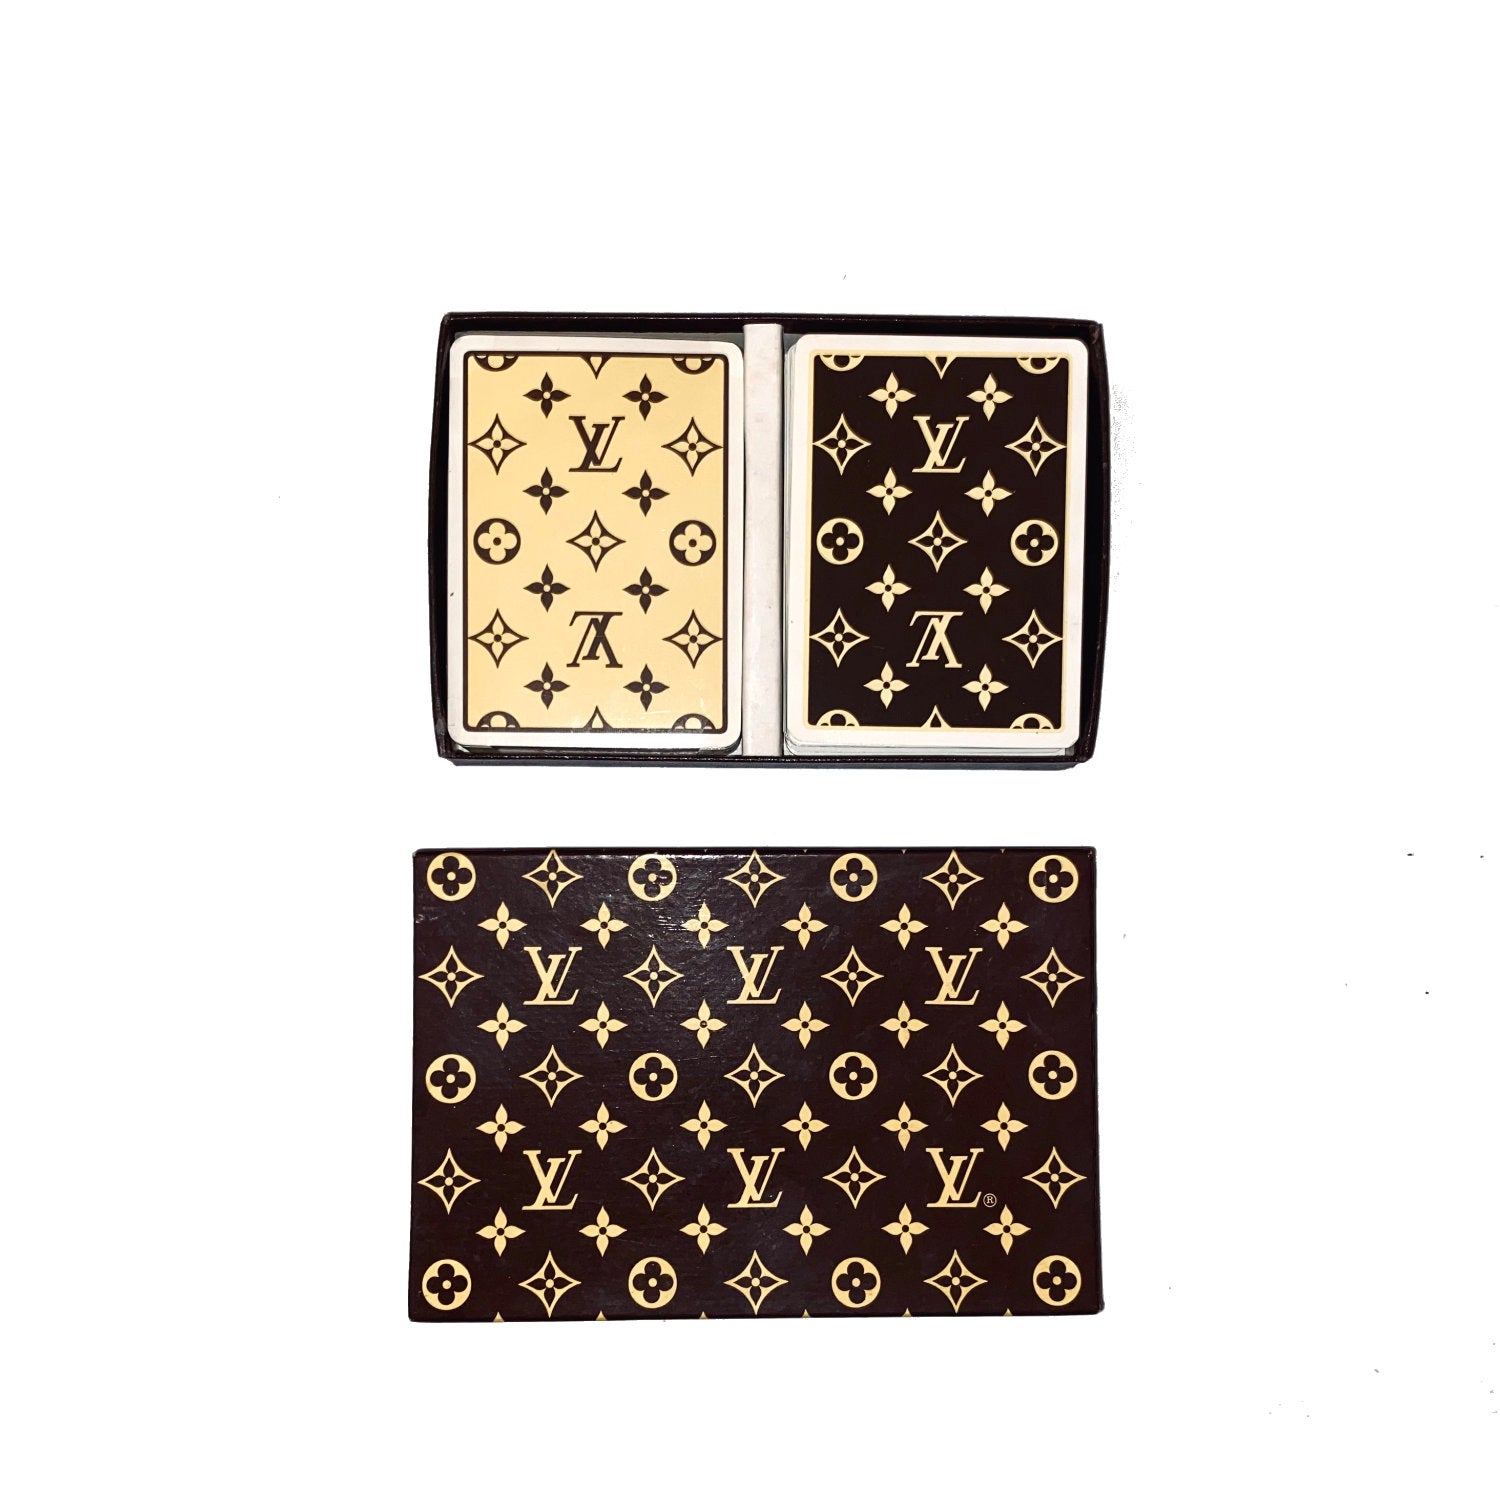 Two sets of Louis Vuitton vintage playing cards with monogram motif and gilt edges. Includes box and bridge contrat card.